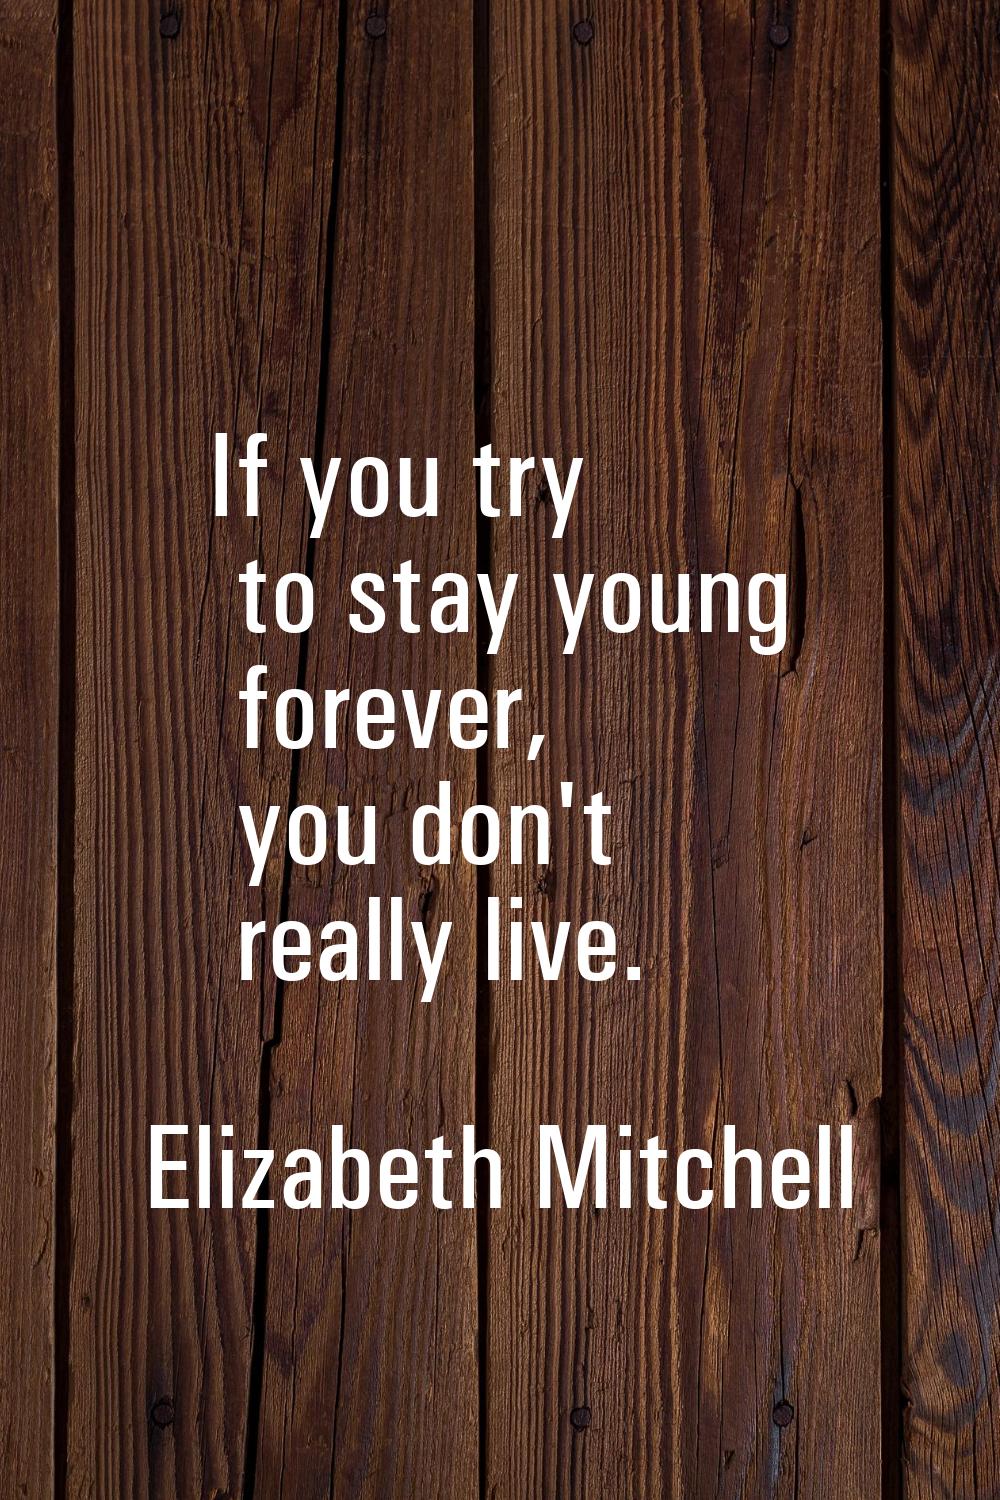 If you try to stay young forever, you don't really live.